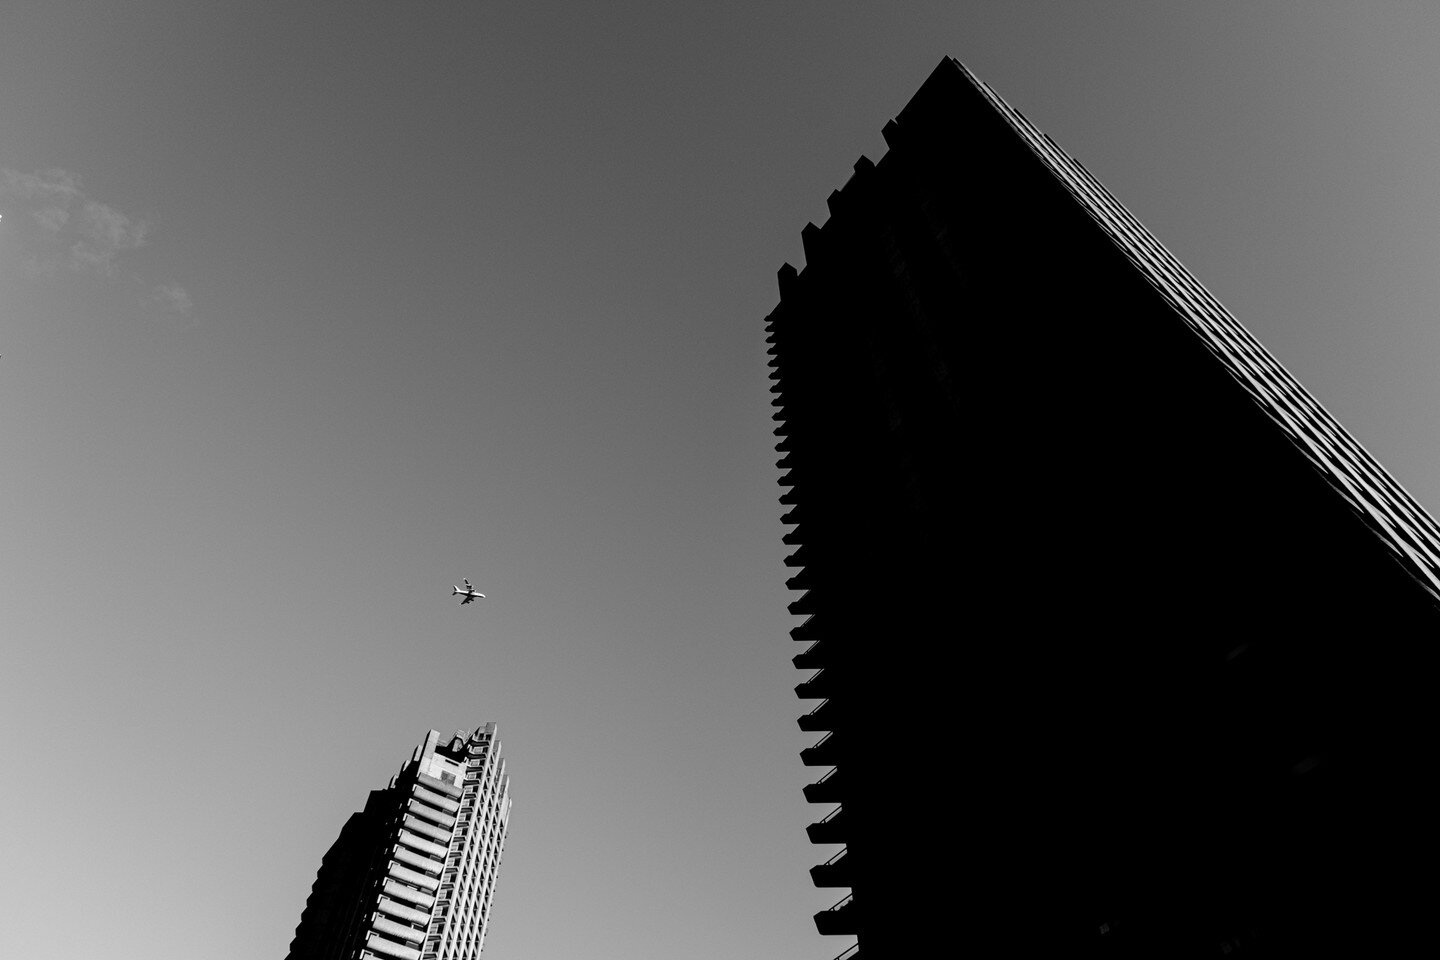 Could totally be an album cover.

#barbican #architecturephotography #architecturalphotography #architecture #brutalism #urbanphotography #bnwphotography #bnw #fujifilm #fujifilmxt5 #xt5 #albumcovers #londonphotographer